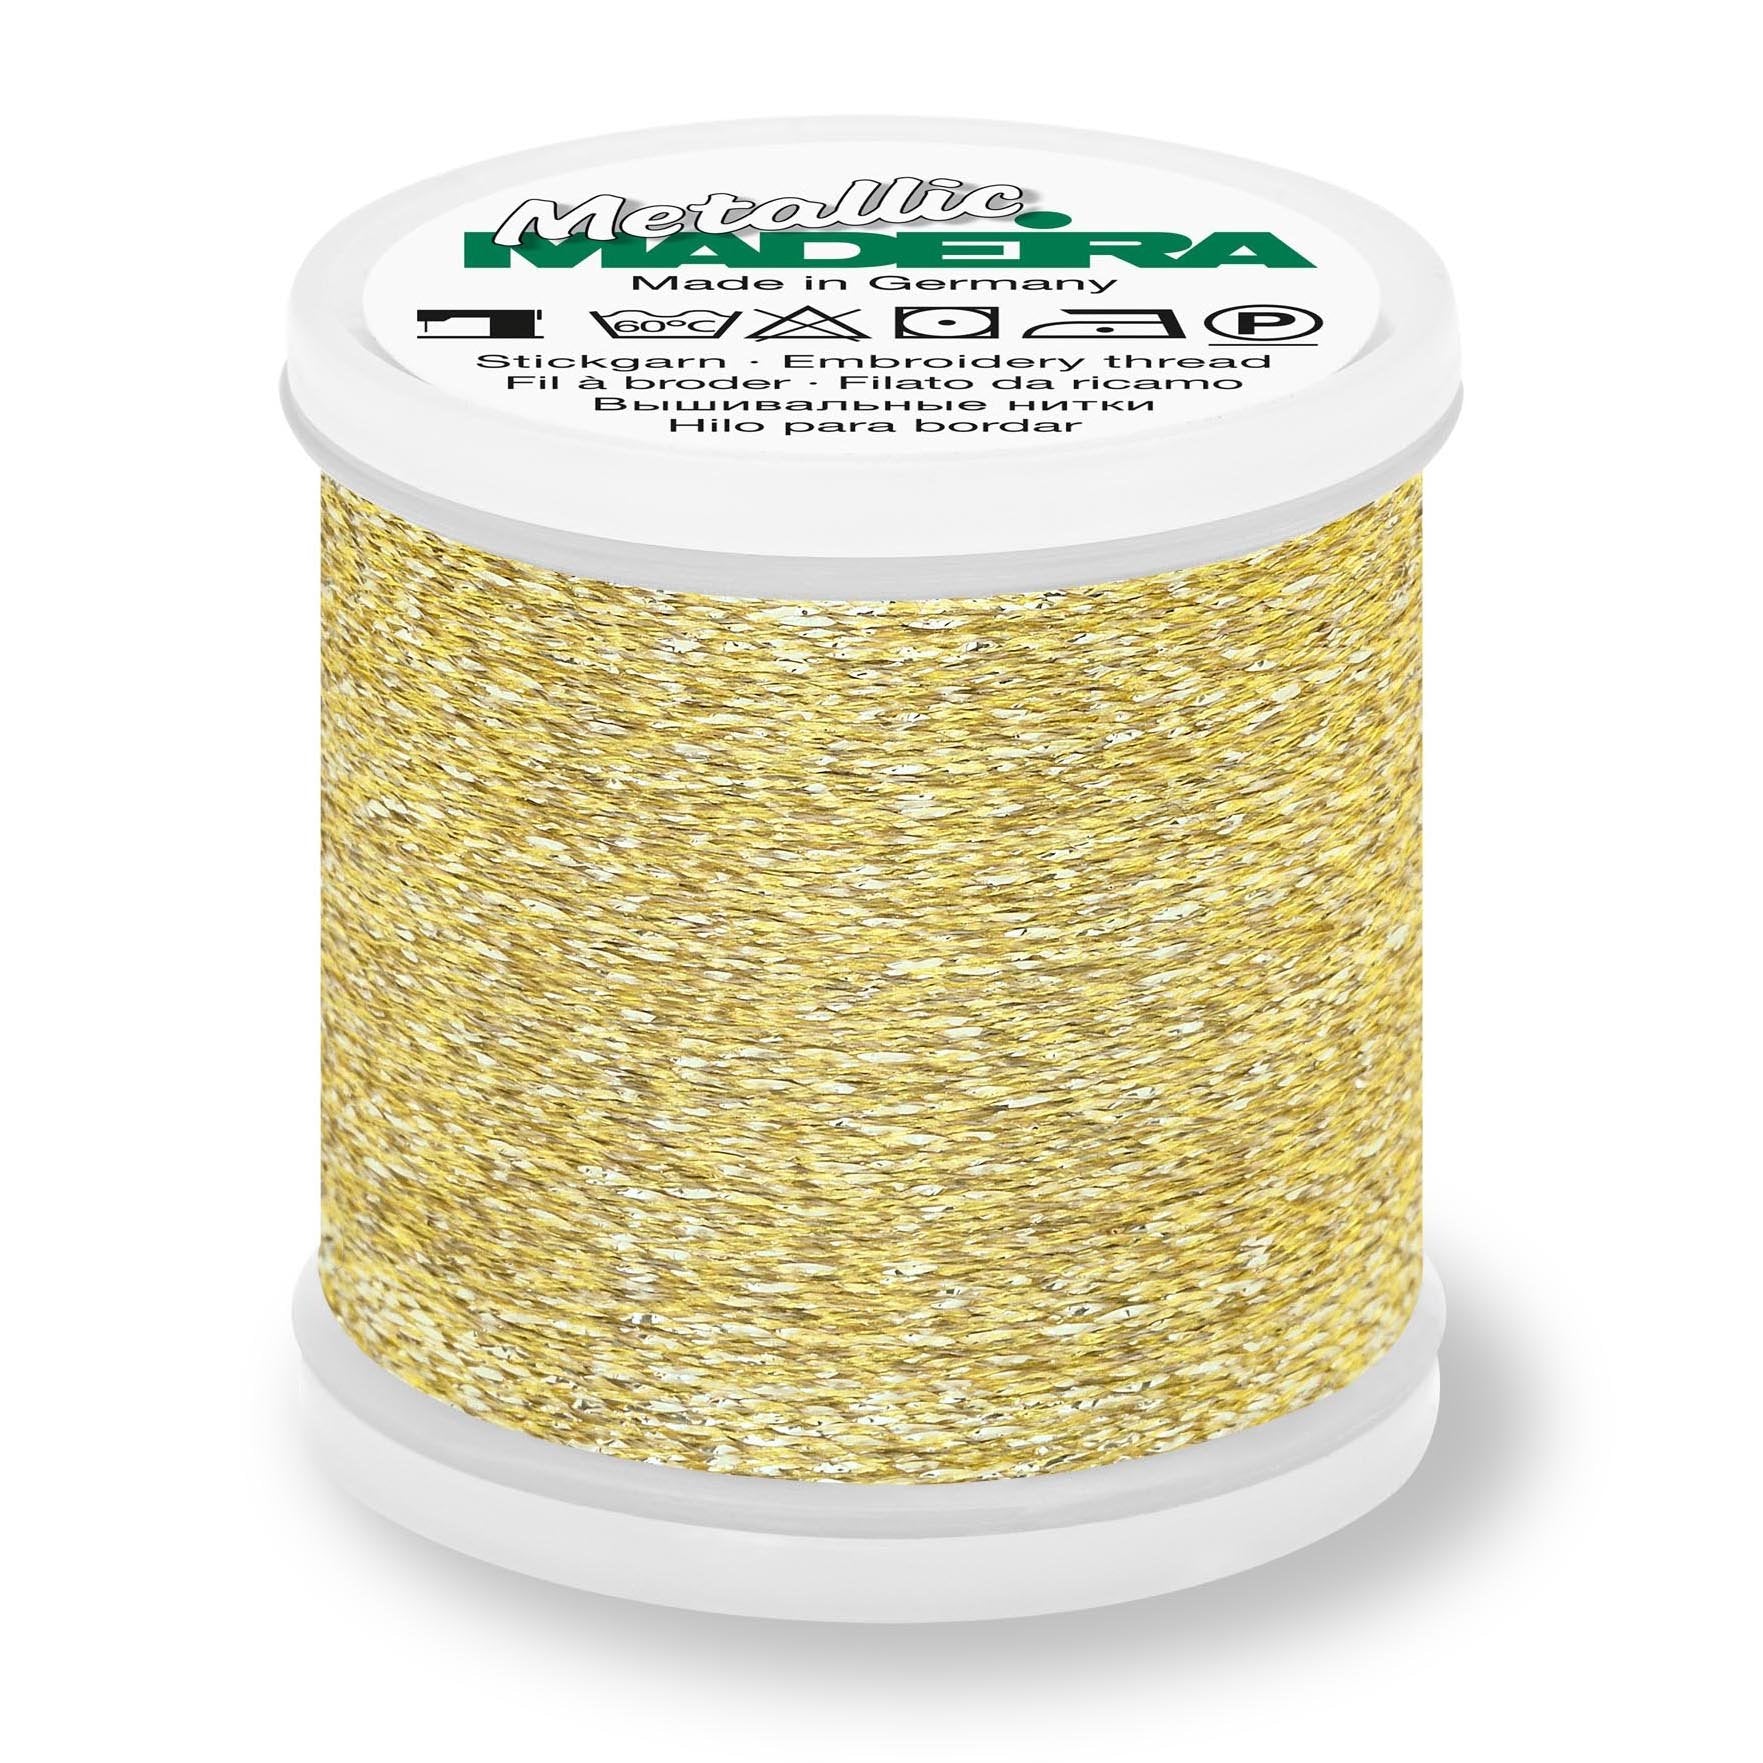 Madeira Textured Metallic Embroidery Thread, 200m Gold 24 from Jaycotts Sewing Supplies